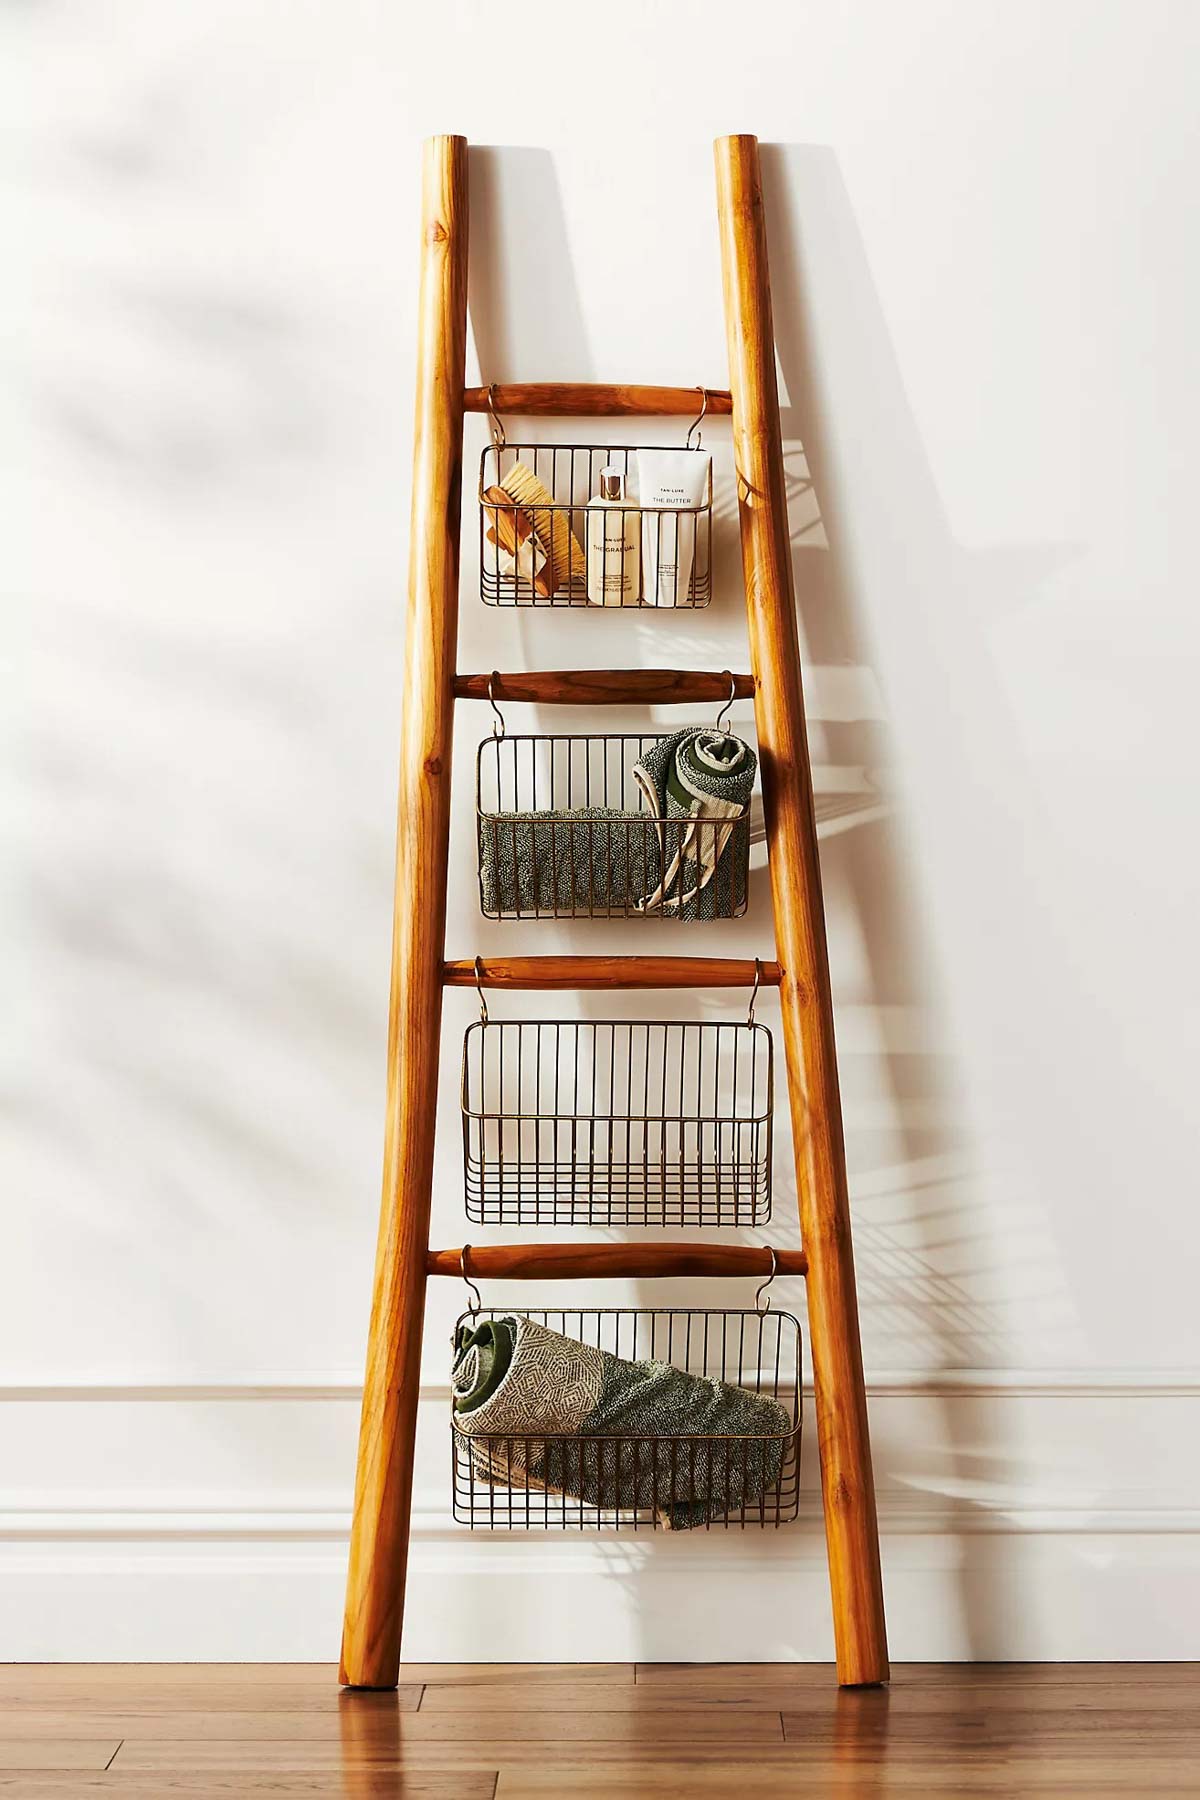 Decorative ladder with wire bins hanging from rungs